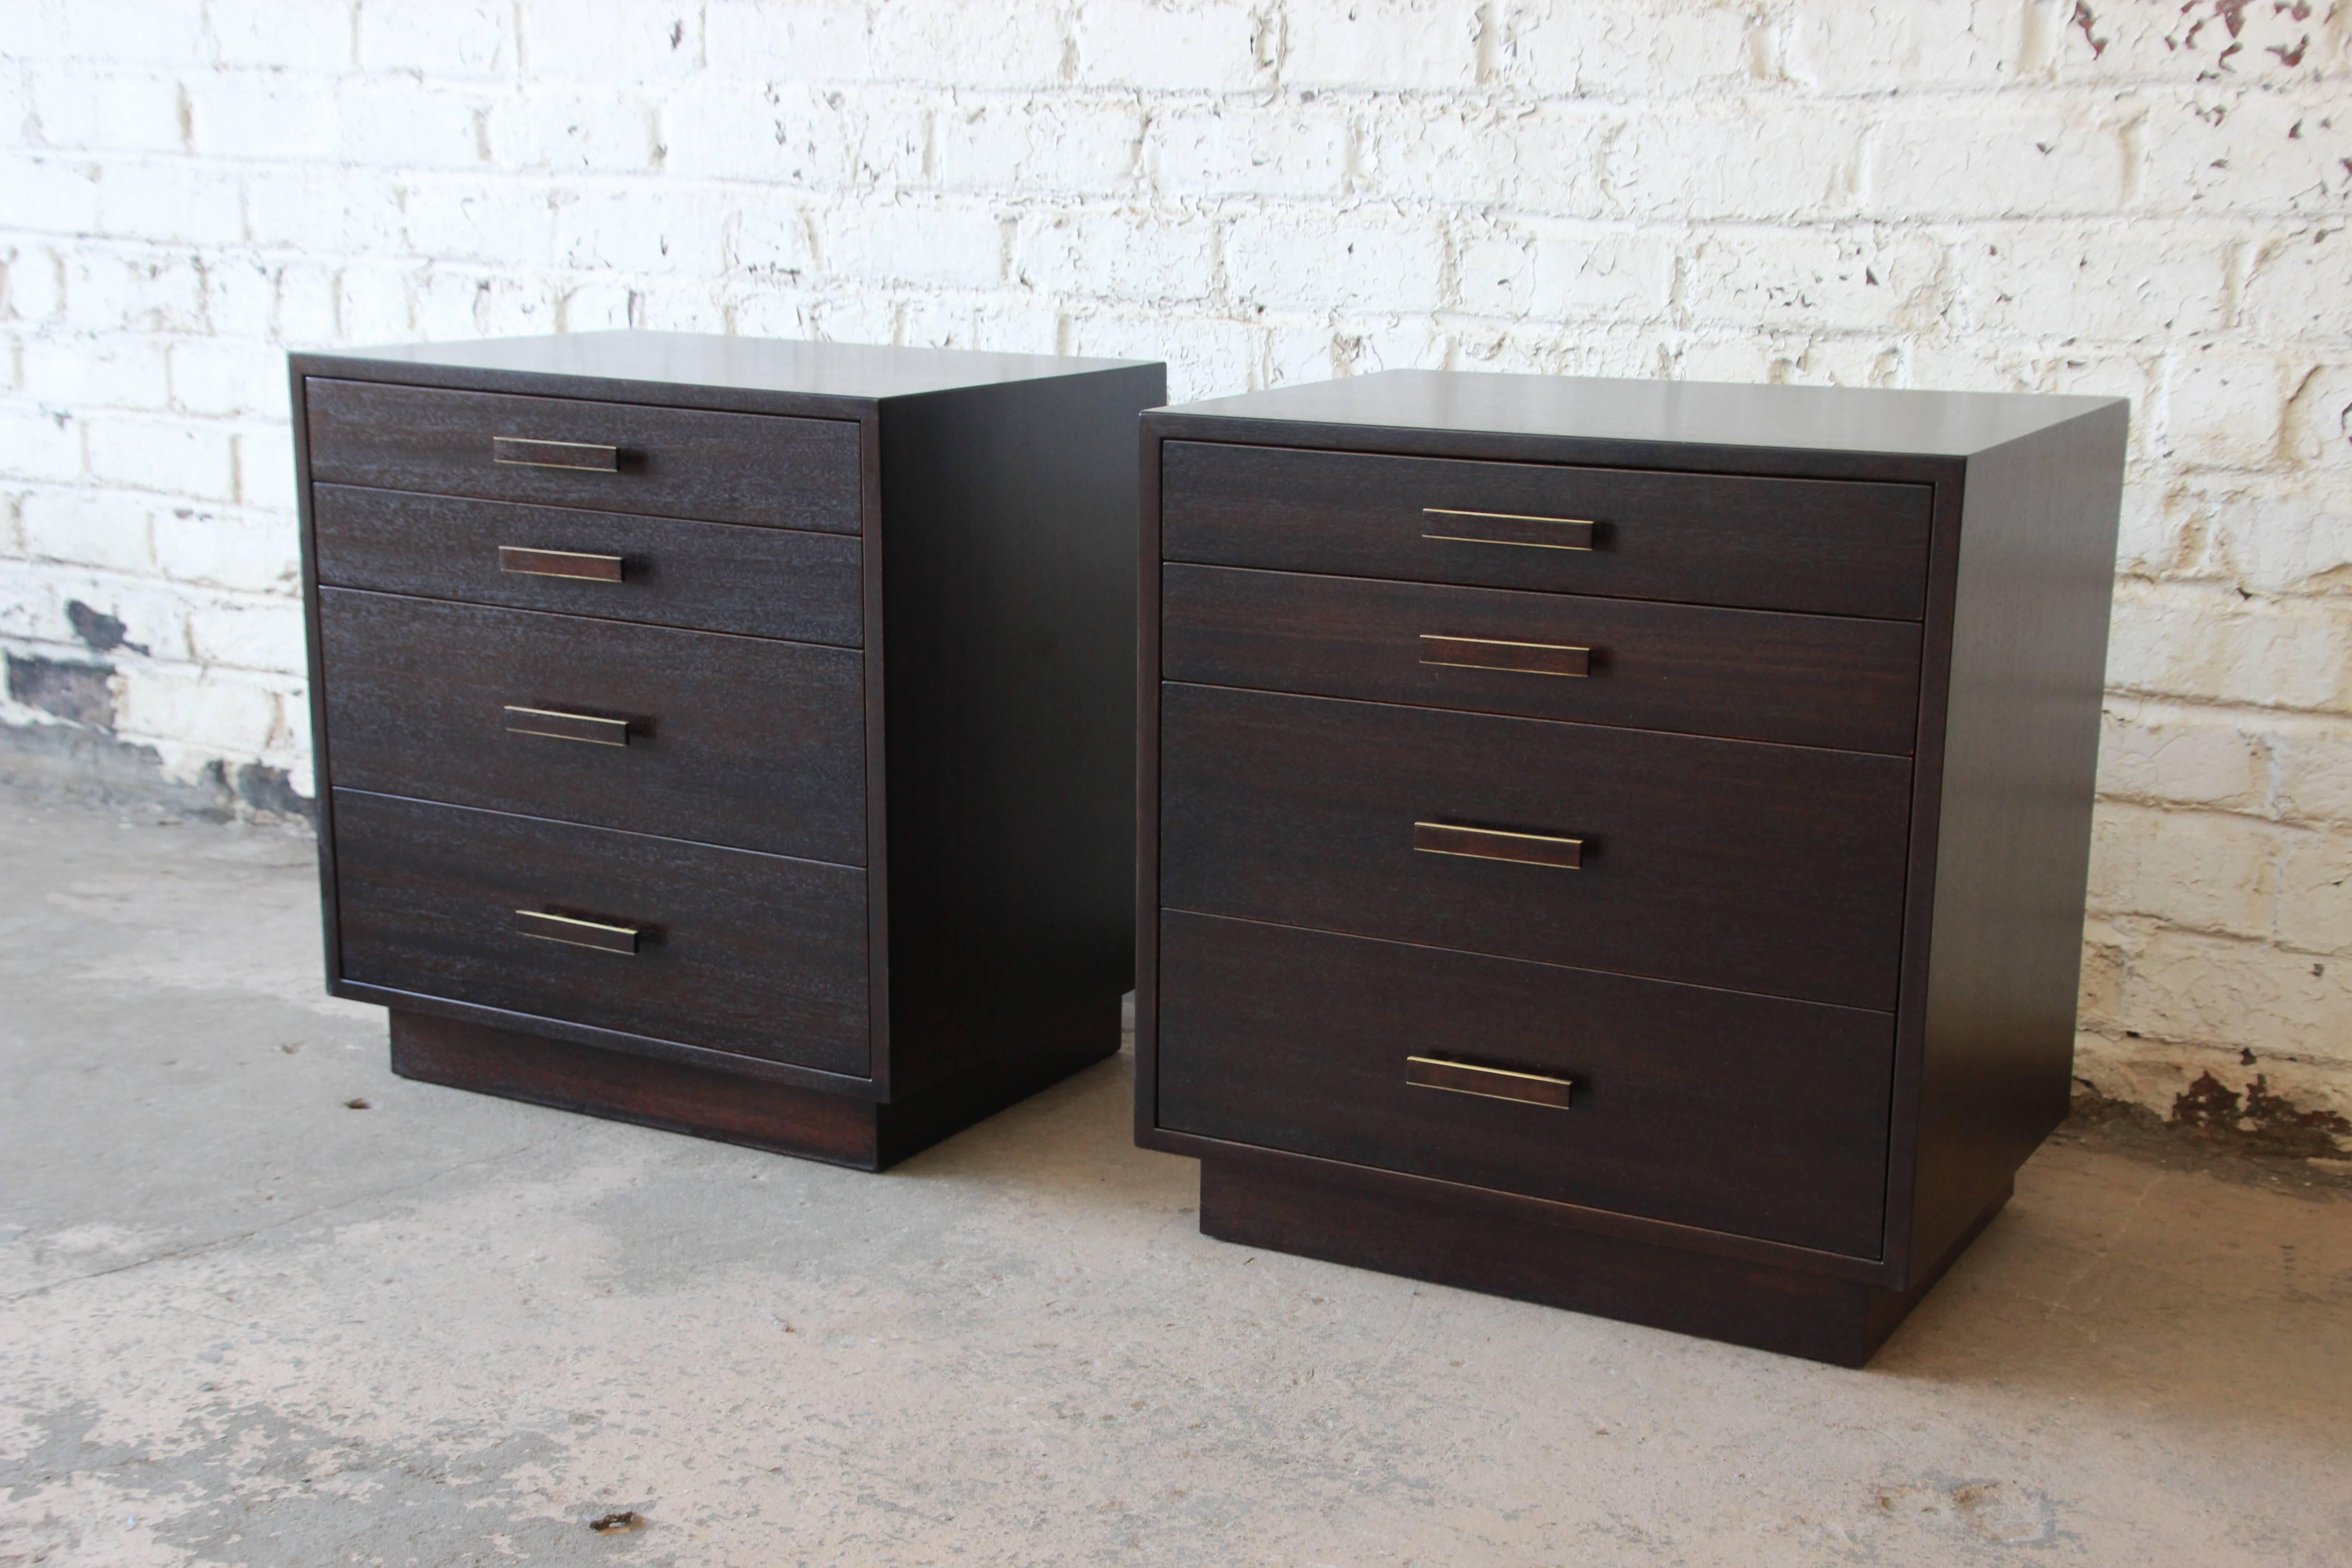 An excellent pair of chest or nightstands by Harvey Probber. The nightstands have been restored and refinished into a dark mahogany finish. The top two drawers are smaller with two larger drawers at the bottom. The brass pulls are fitted with